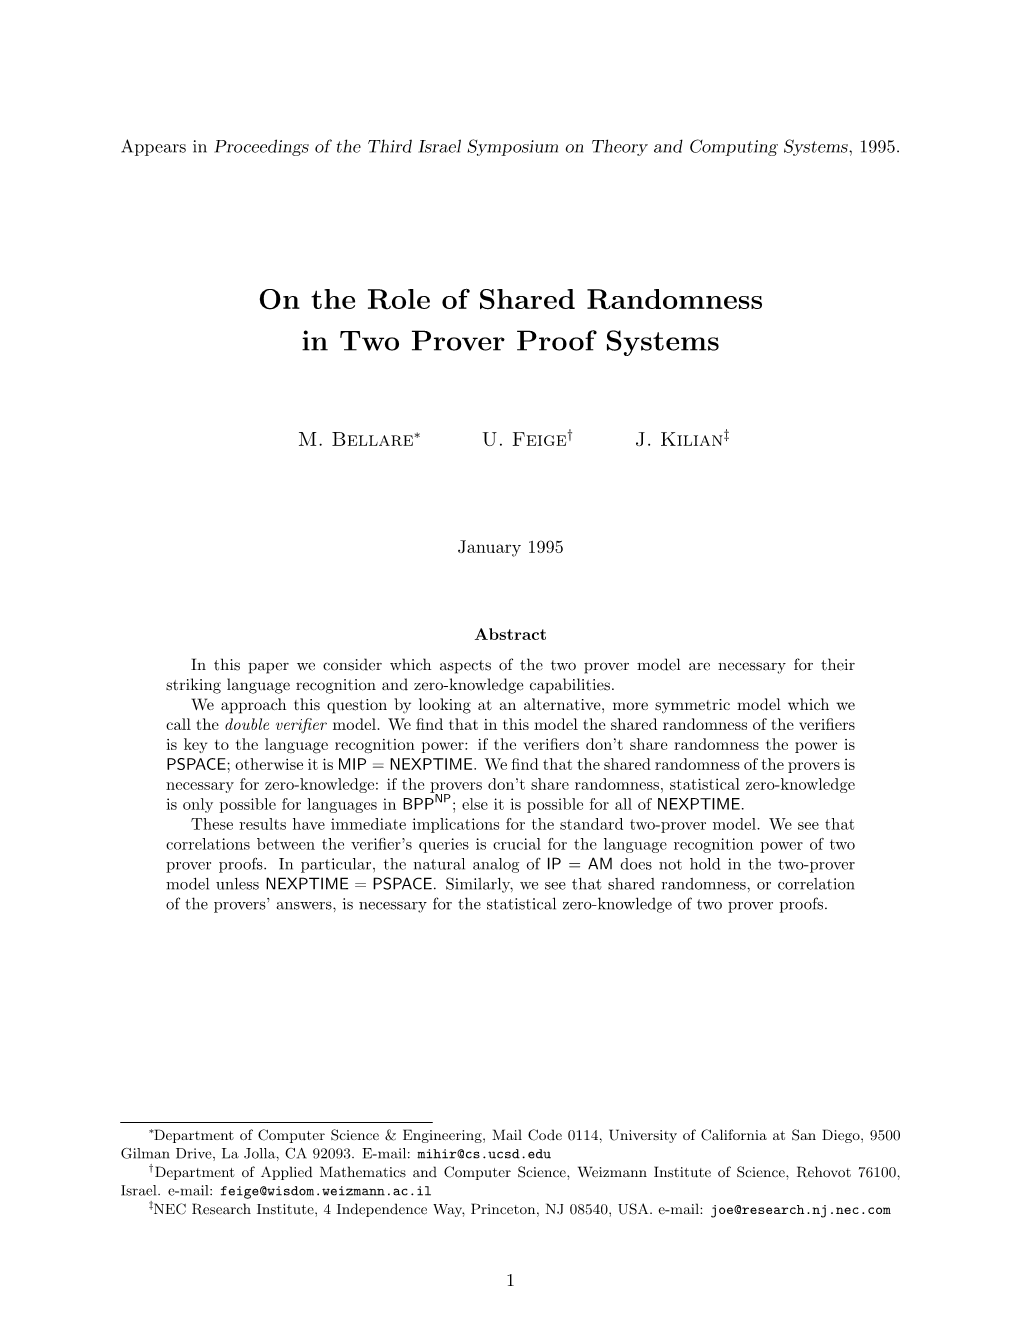 On the Role of Shared Randomness in Two Prover Proof Systems